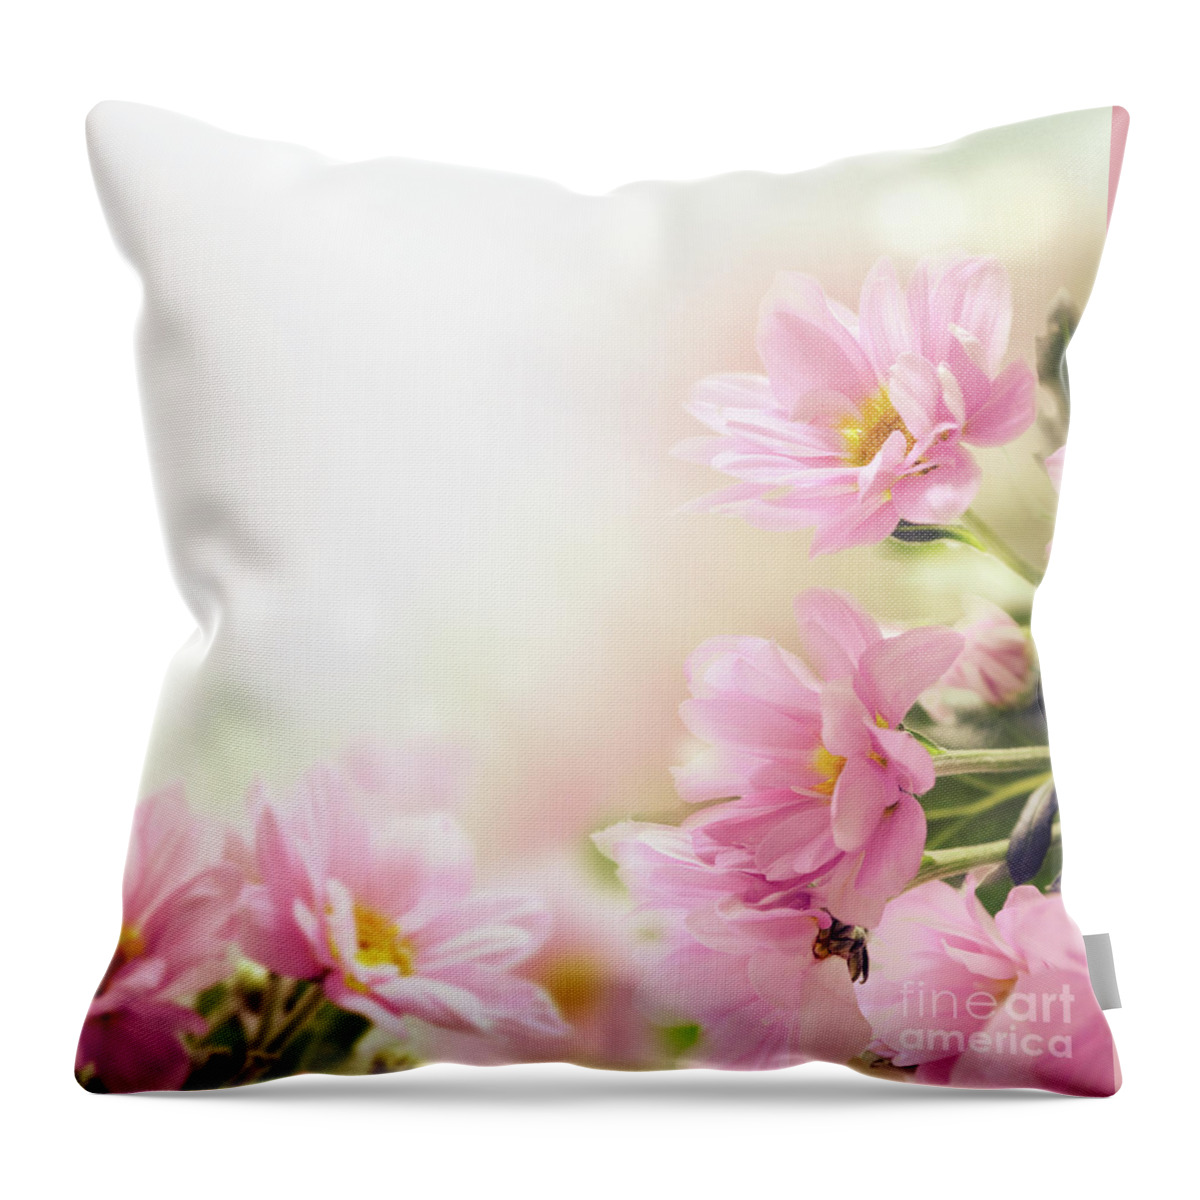 Flower Throw Pillow featuring the photograph Garden with pink flowers by Jelena Jovanovic